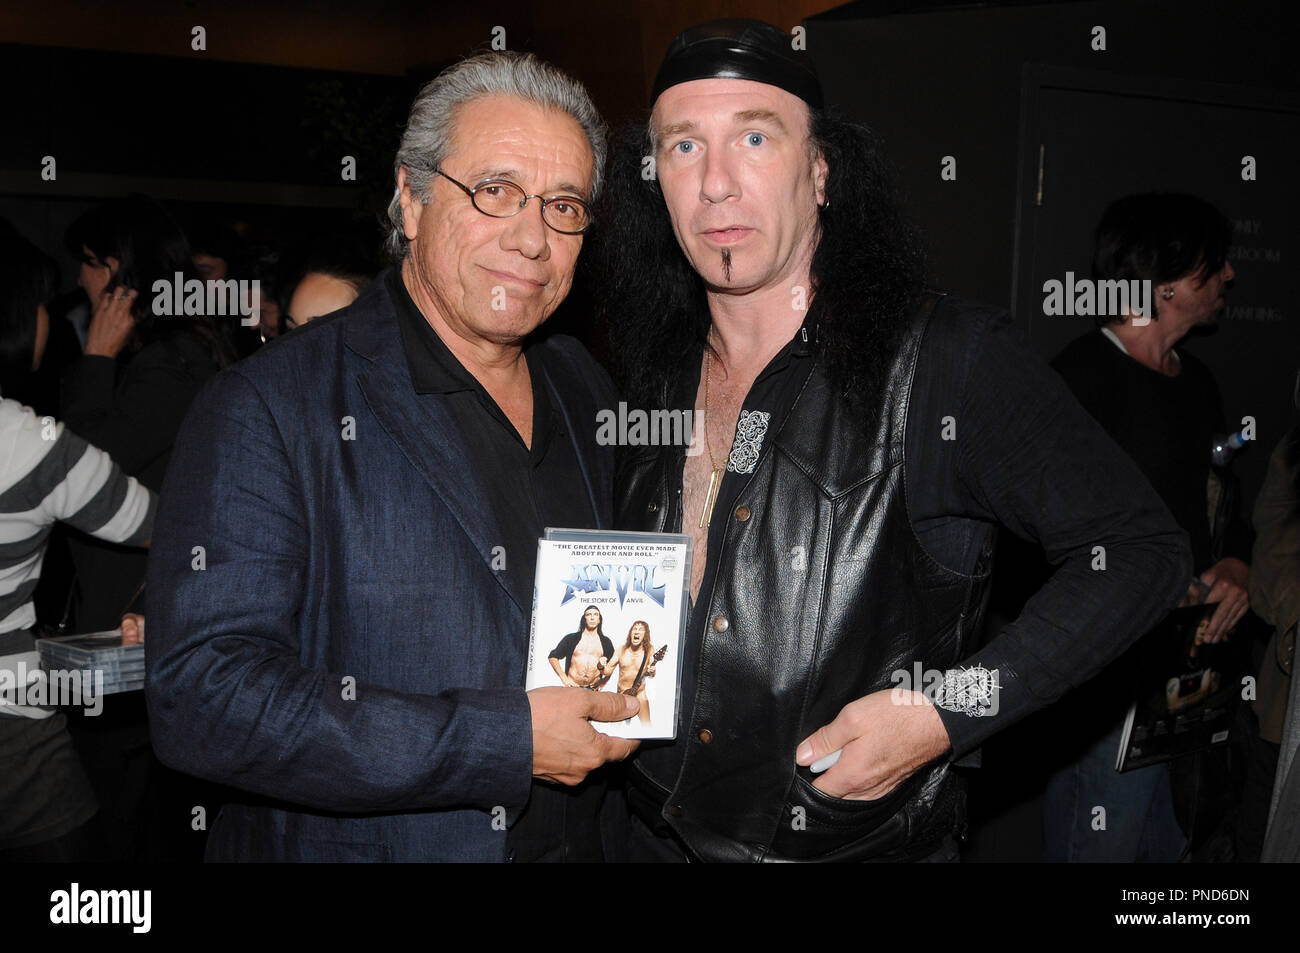 Edward James Olmos and Robb Reiner of Anvil during the reception of the DVD release of 'Anvil The Story of Anvil' held at the WGA in Beverly Hills, CA on Thursday, October 8, 2009. Photo by Richard Soria/ PRPP /PictureLux File Reference # EdwardJamesOlmosReiner02 10809PRPP  For Editorial Use Only -  All Rights Reserved Stock Photo